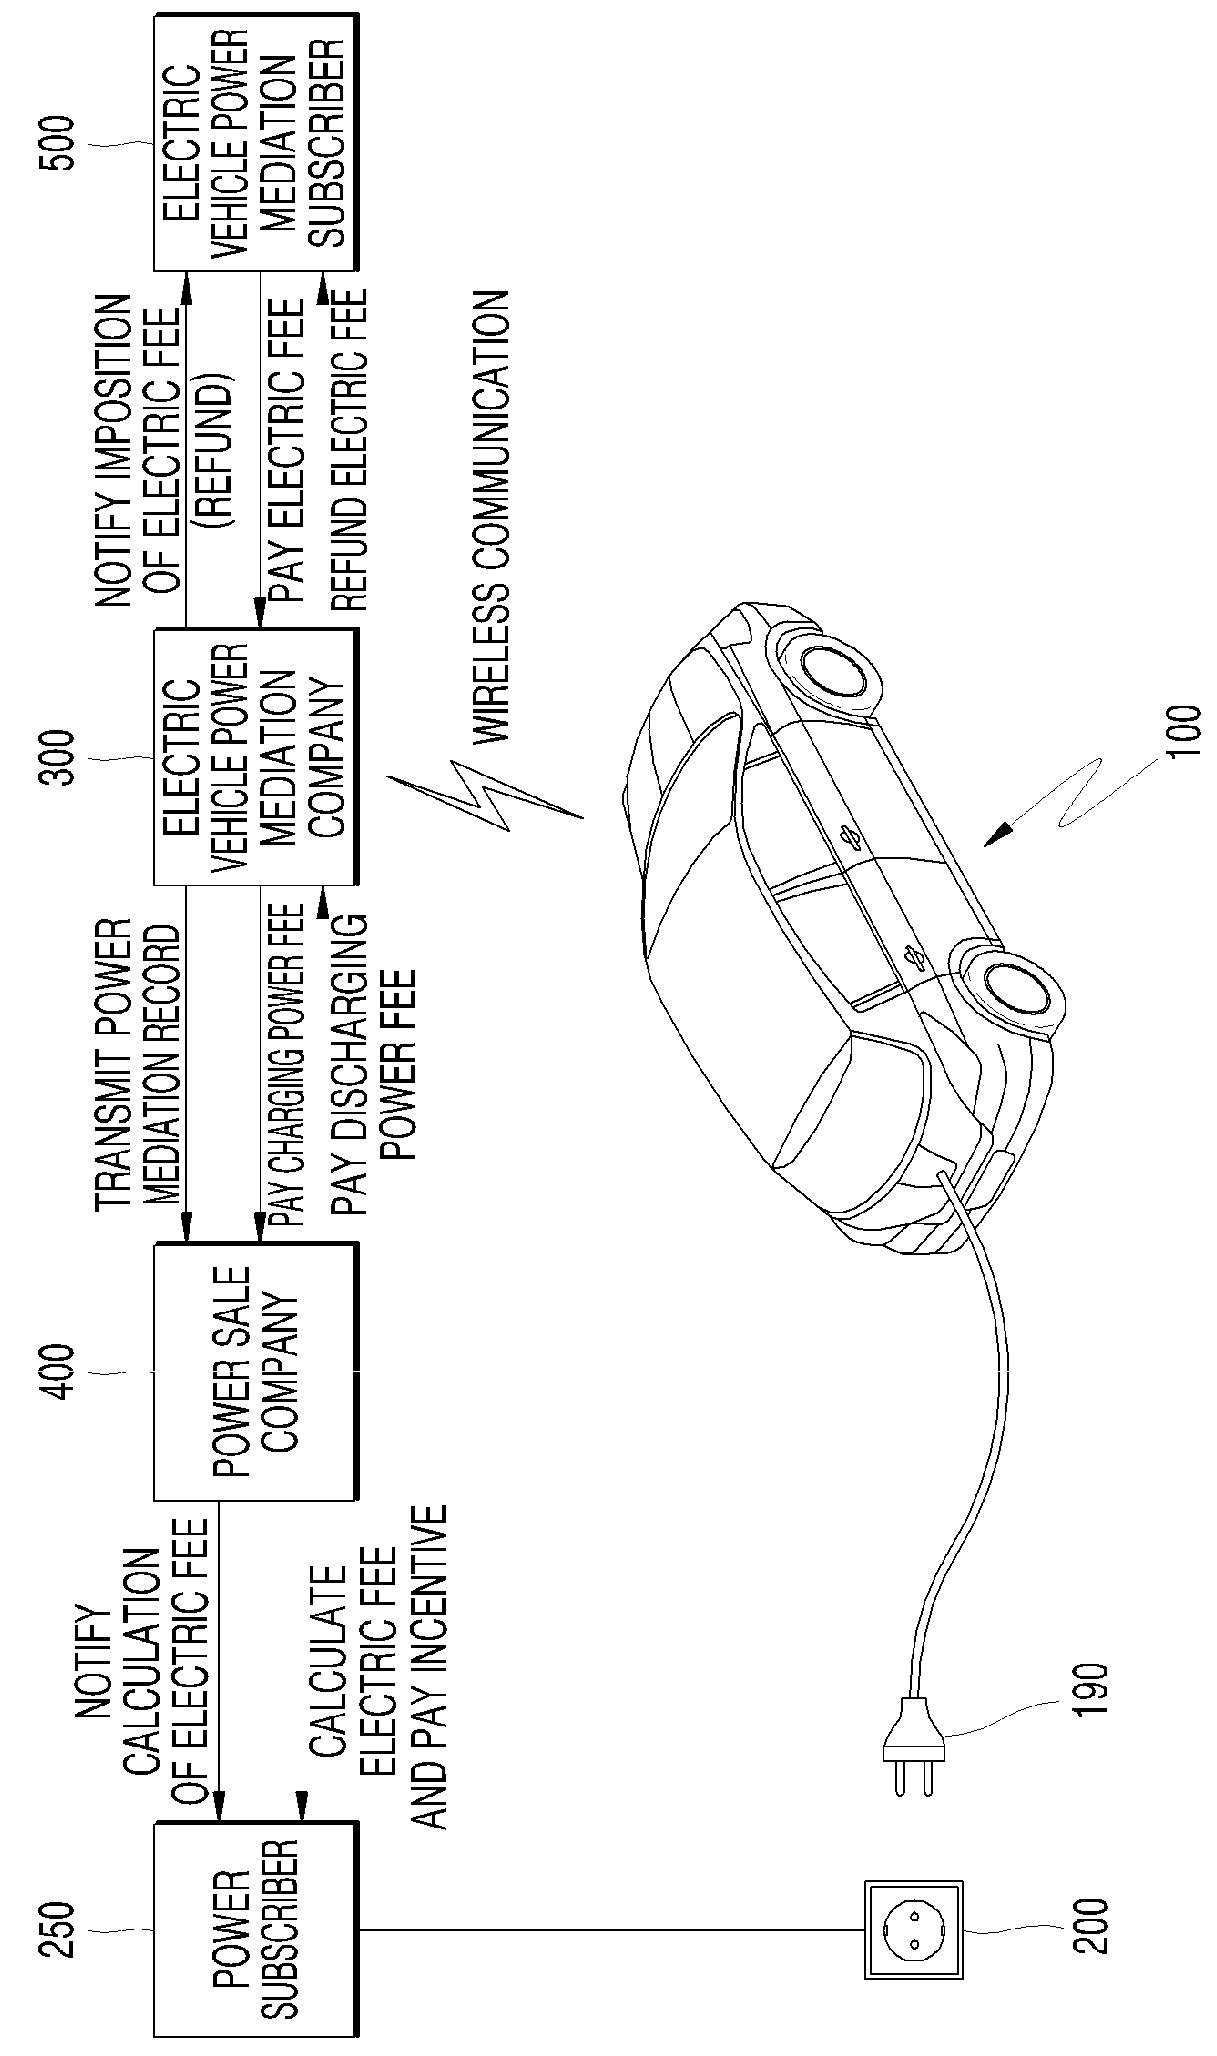 Location-based electric power mediation module, electric vehicle, mediation server, and user certification socket or connector